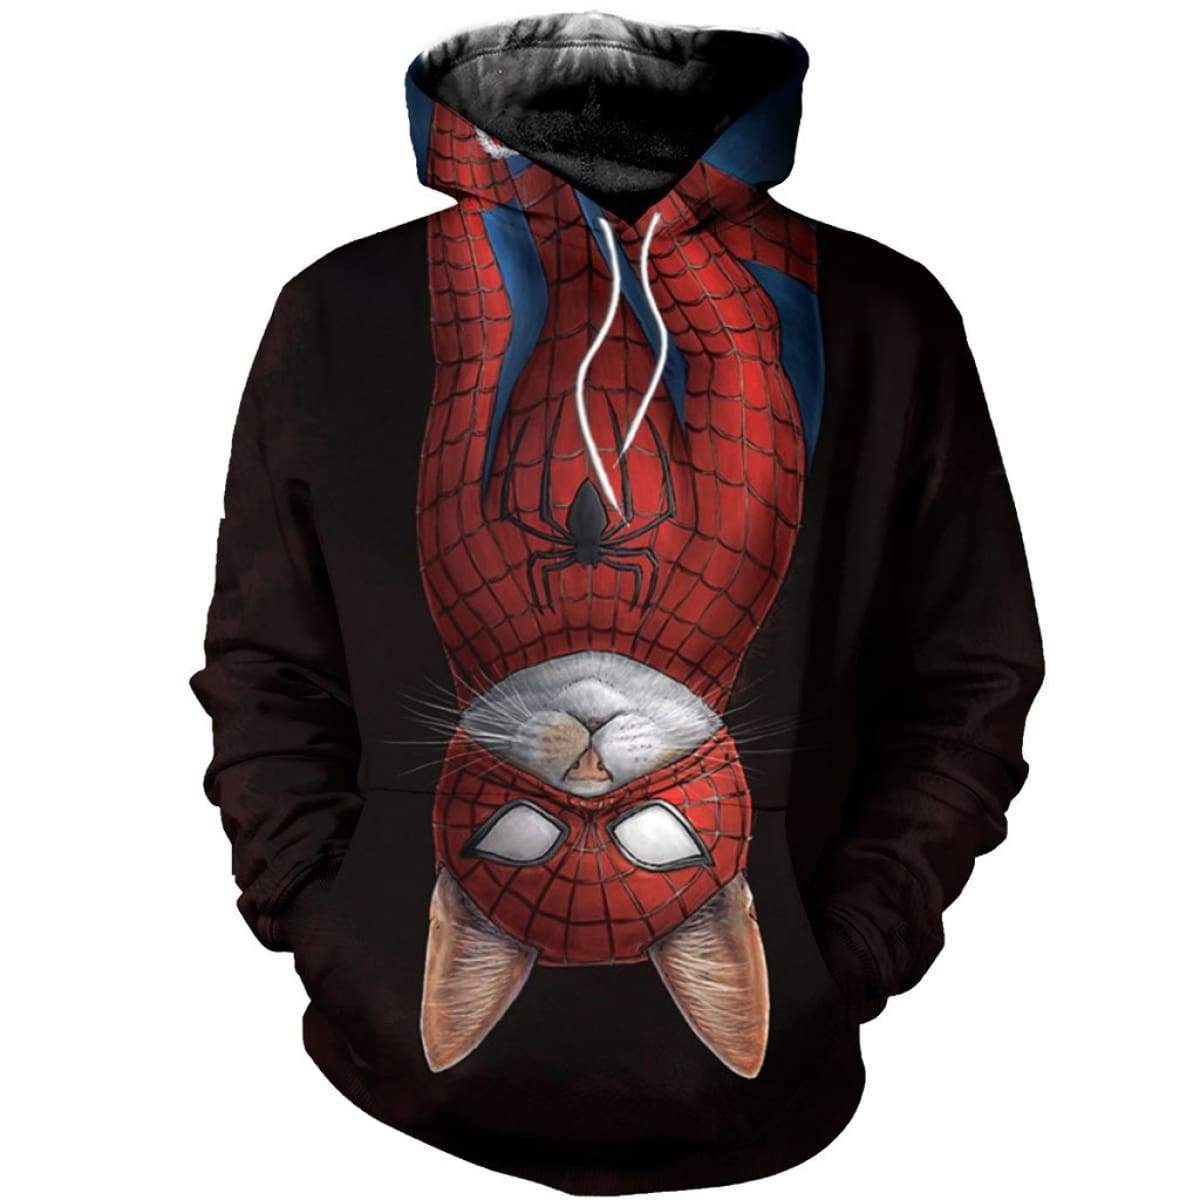 Spider-cat all over printed hoodie